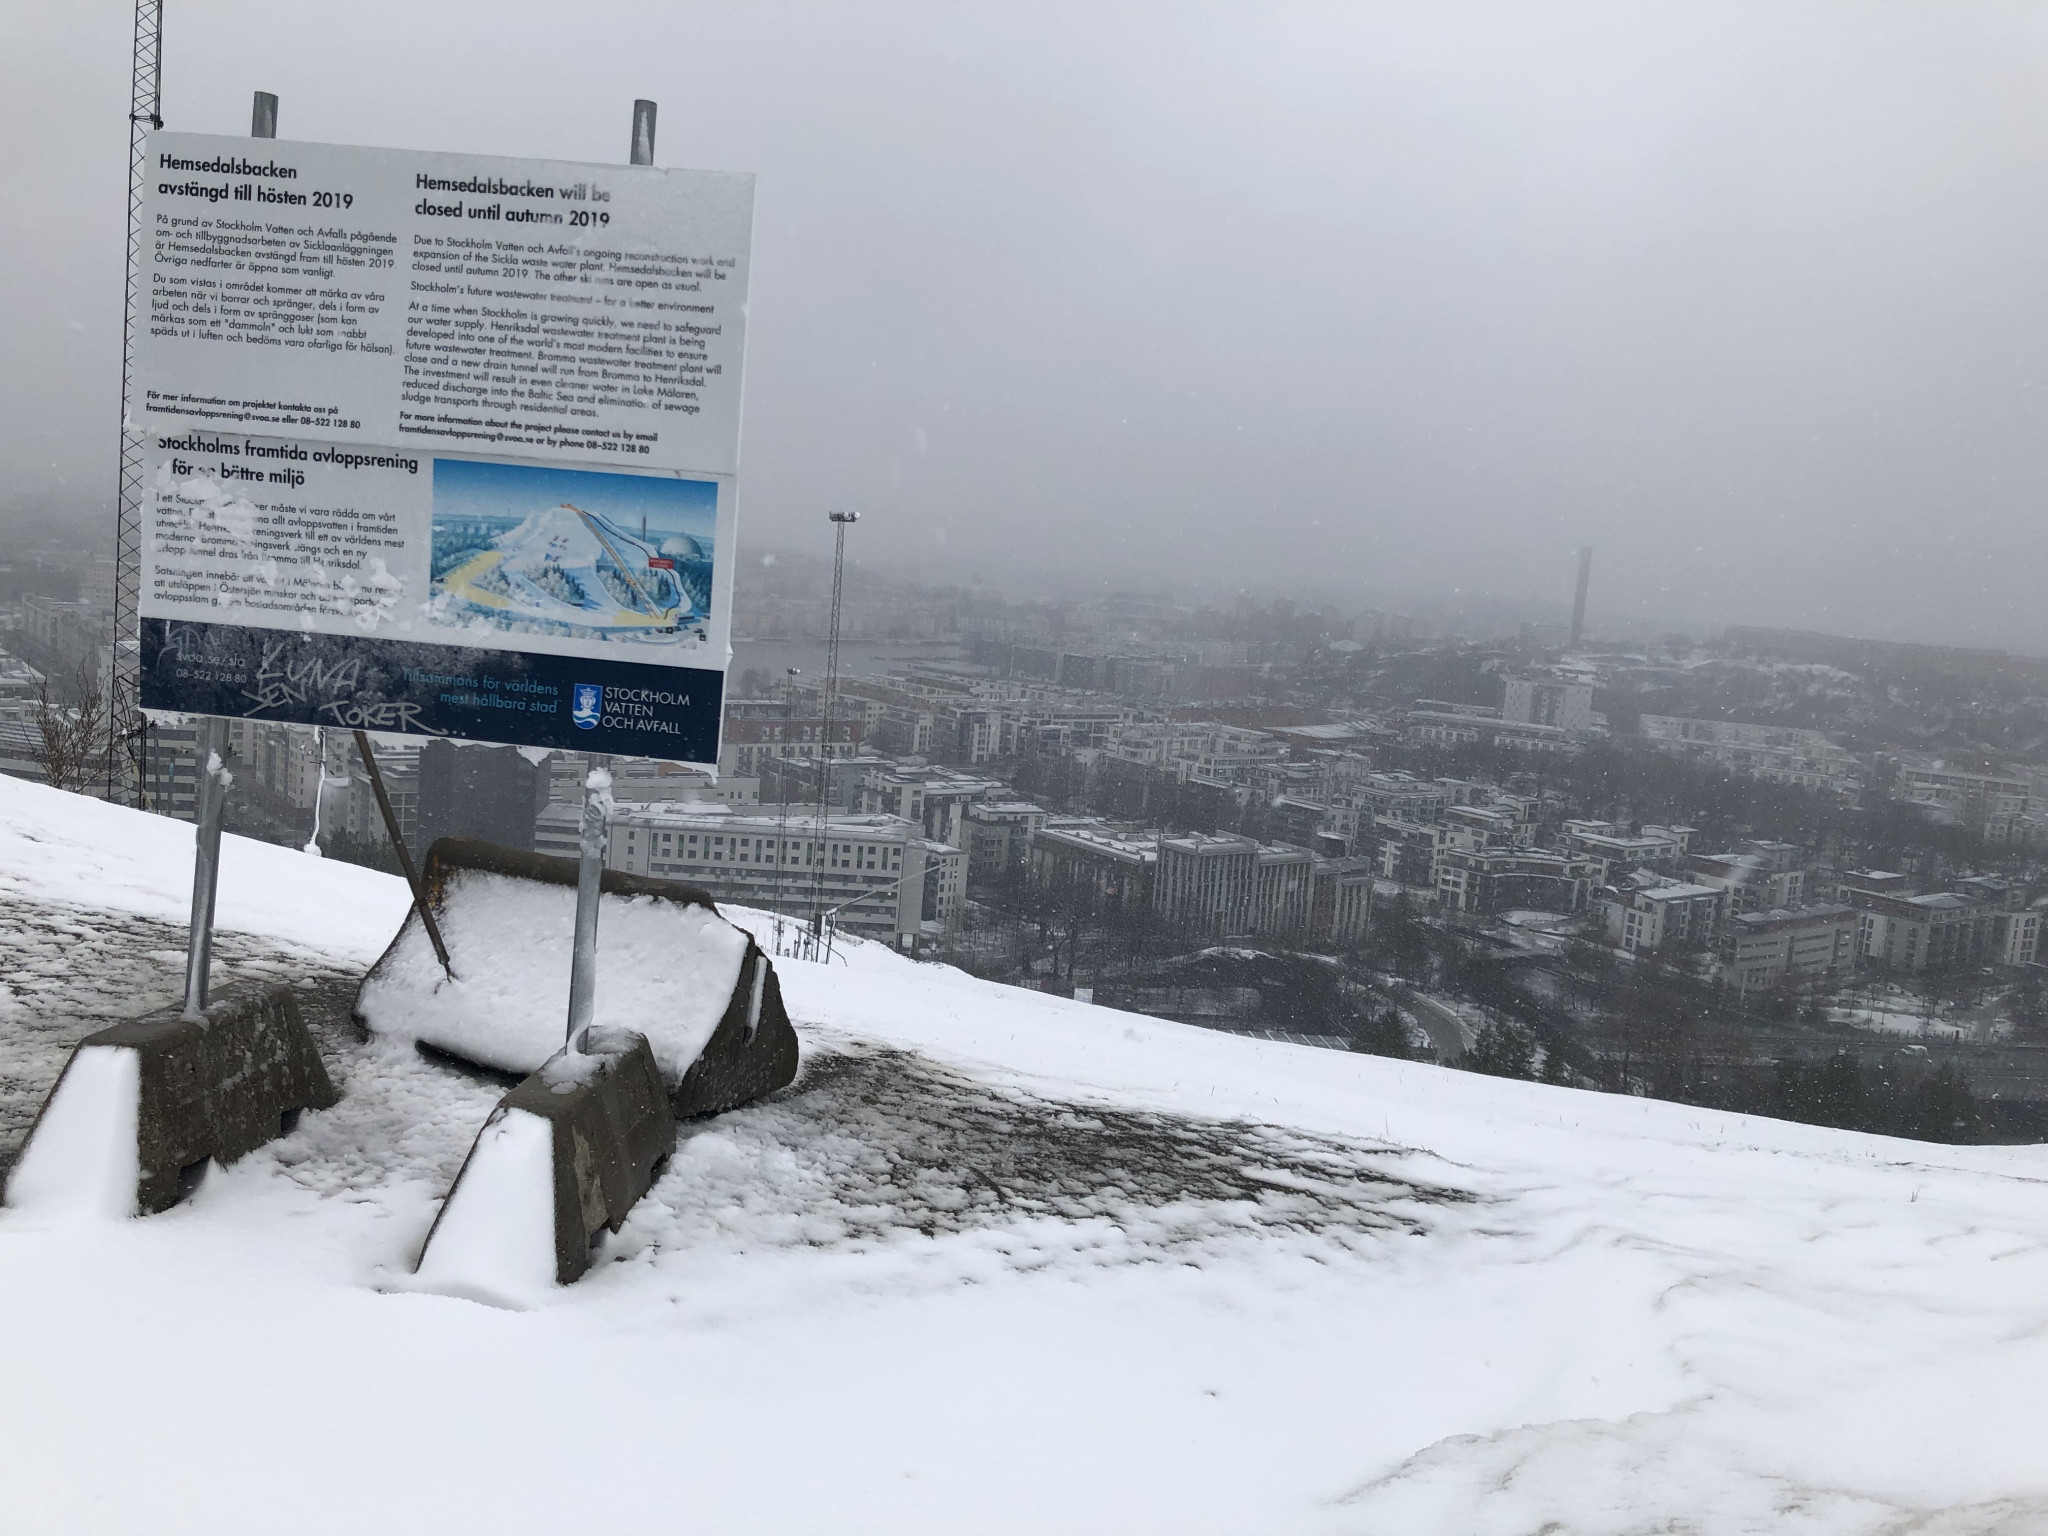 There are great views of Stockholm from Hammarbybacken, the proposed site for parallel team Alpine skiing ©ITG